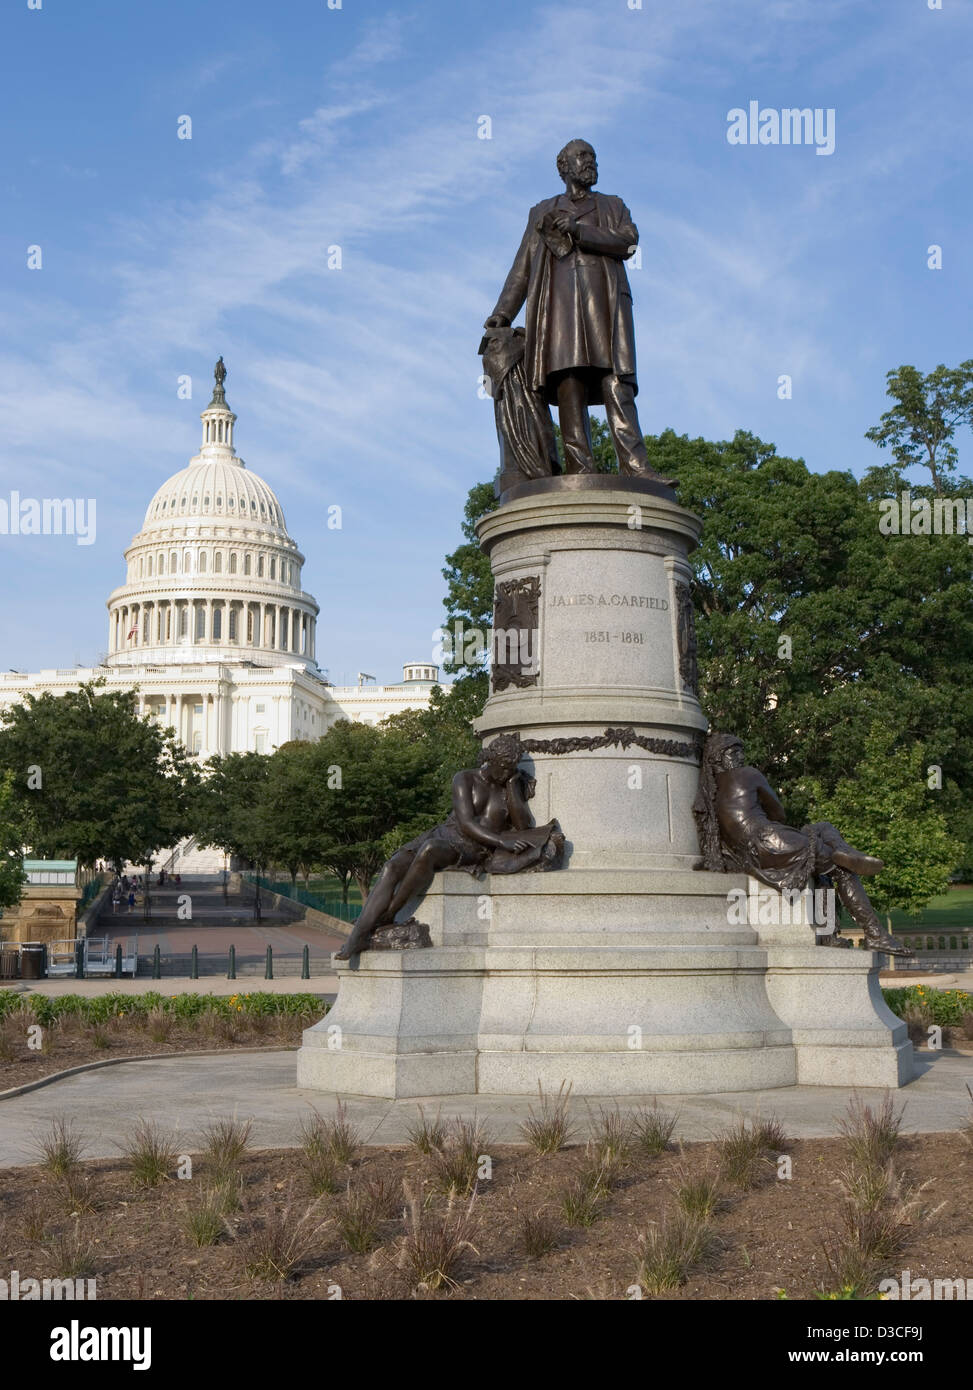 Statue of President James Garfield in front of the US senate building in Washington DC, USA Stock Photo